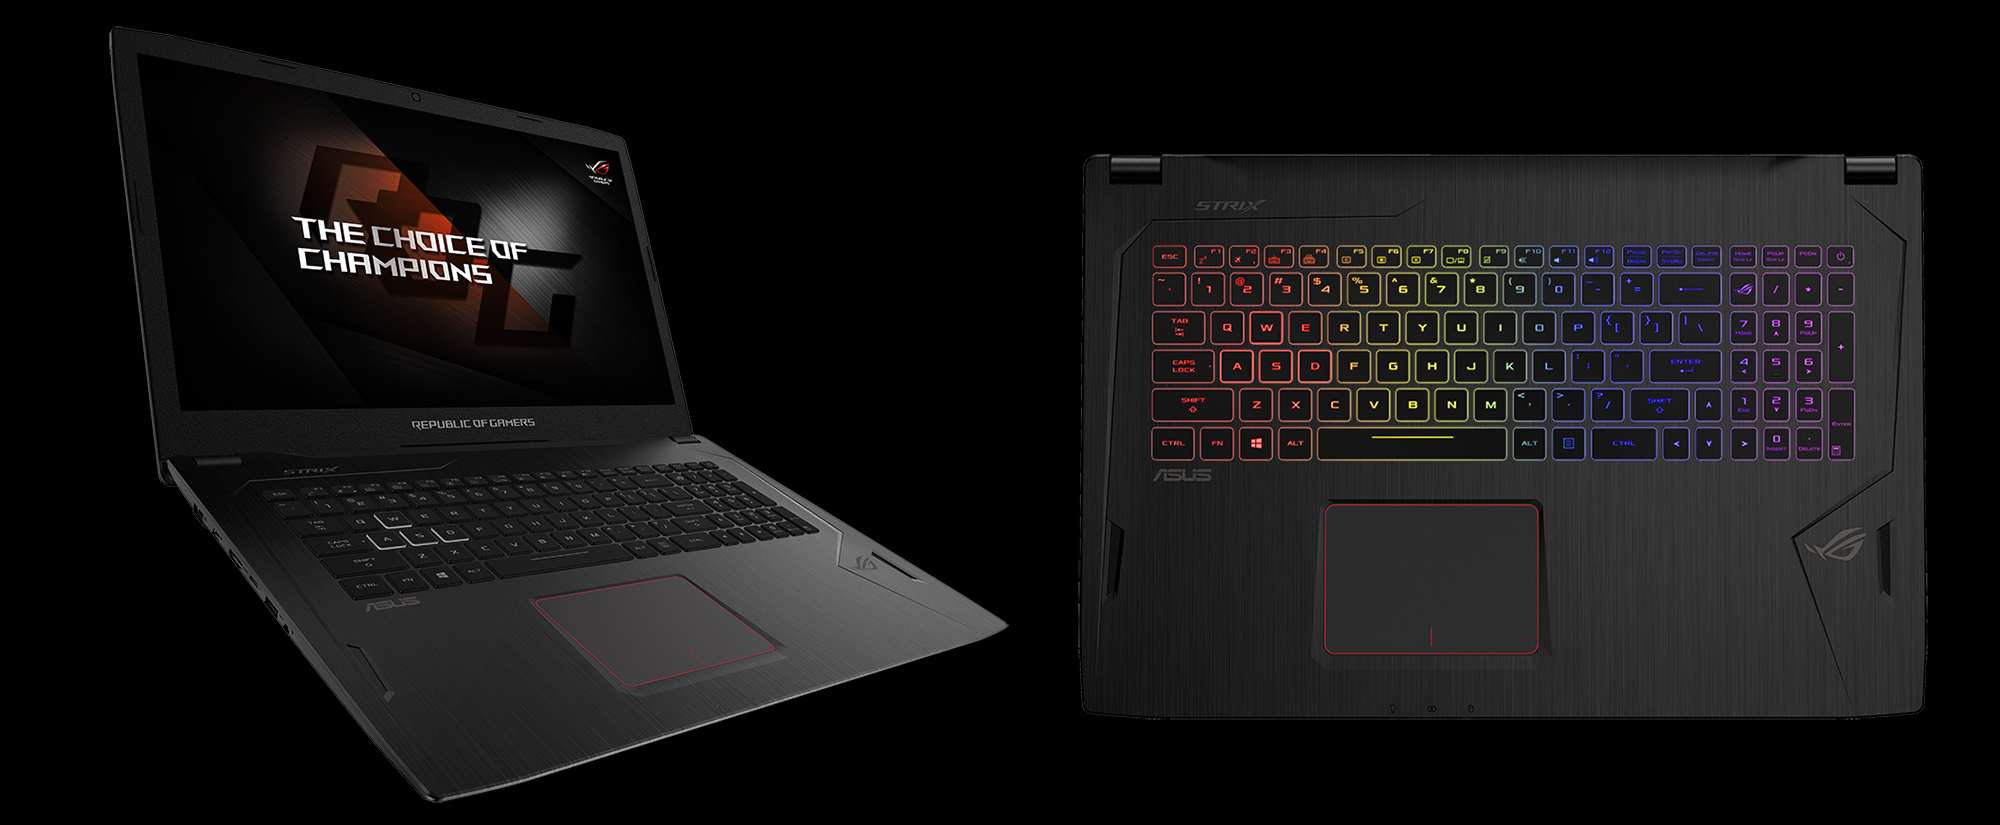 Computex 2017: New ROG products unveiled